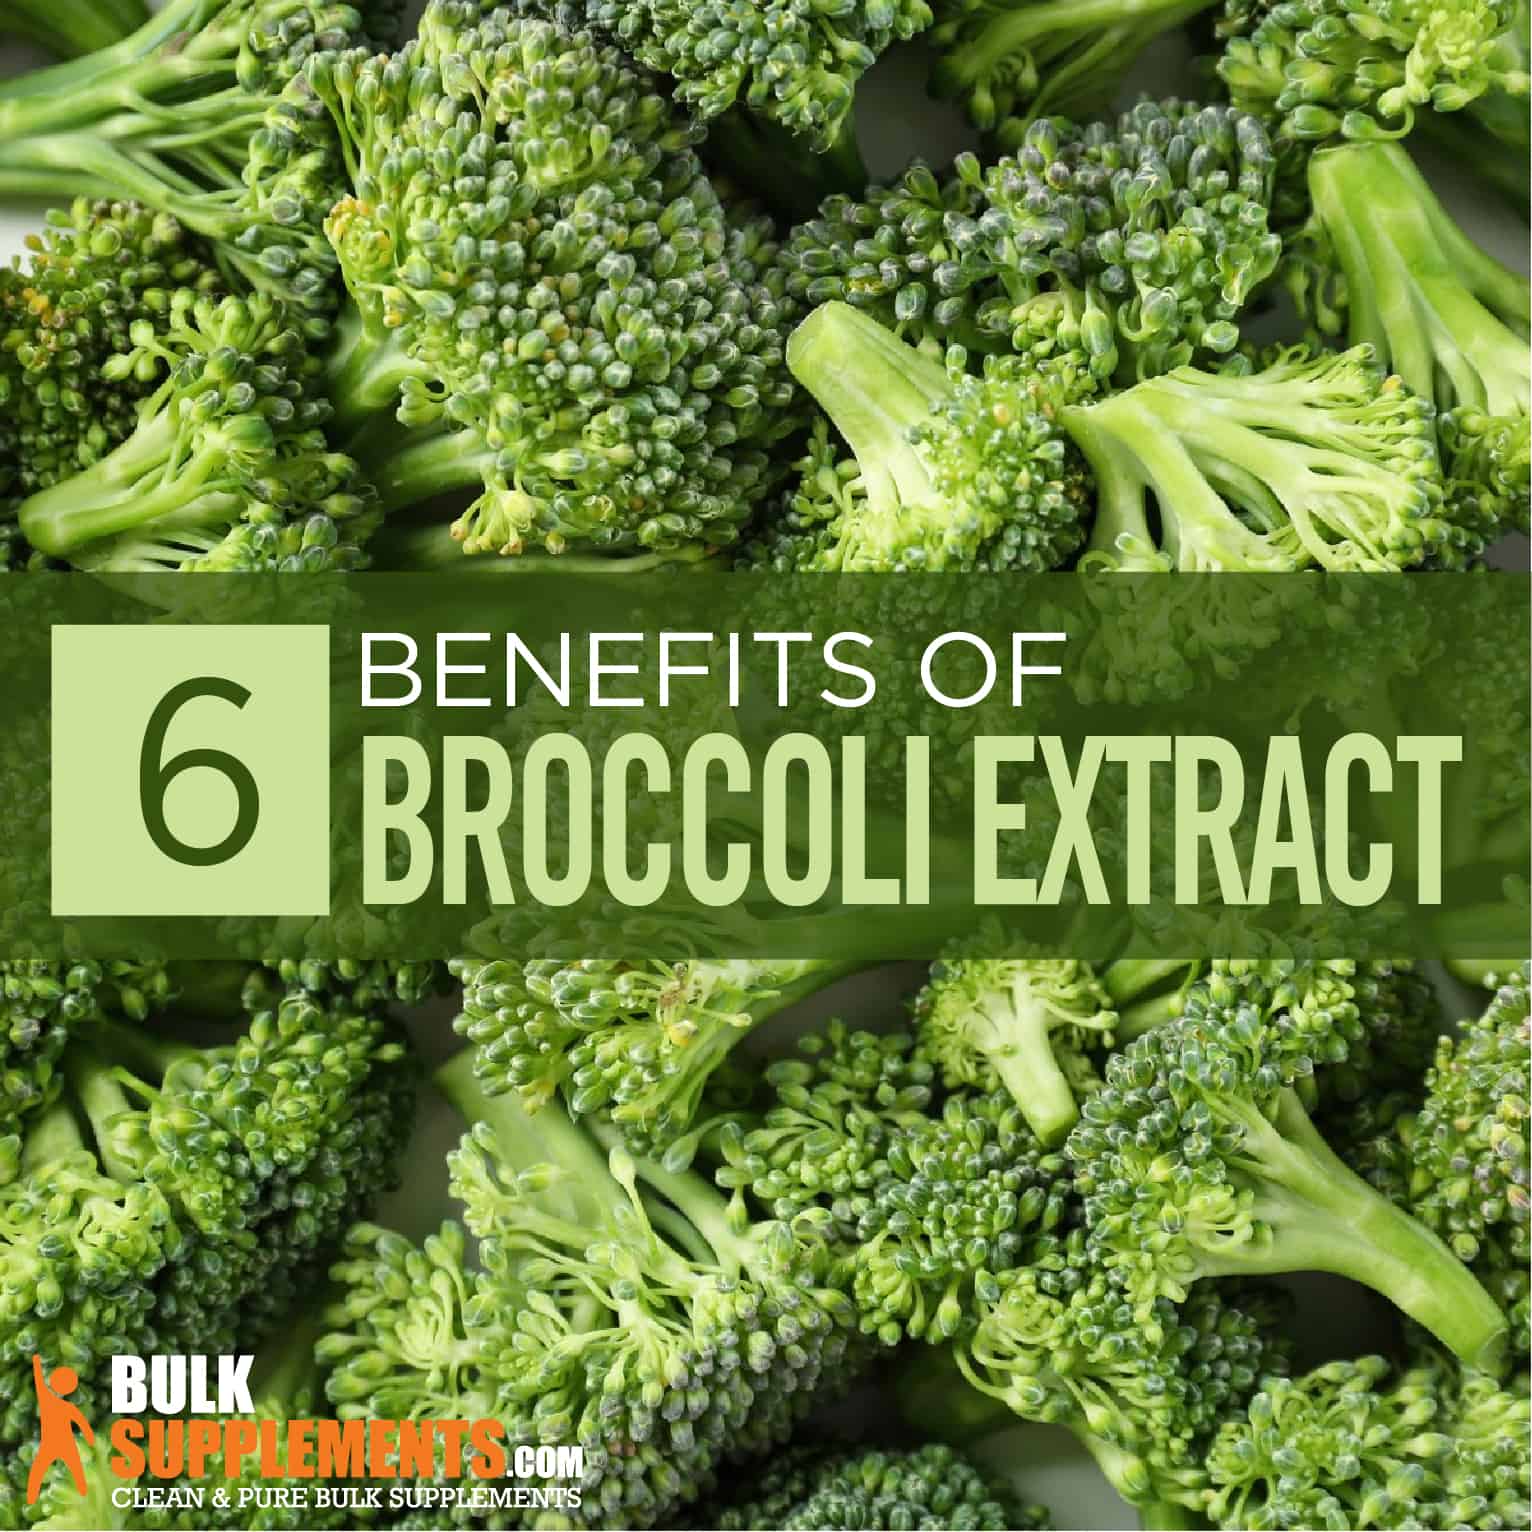 broccoli extract benefits, side effects and dosage